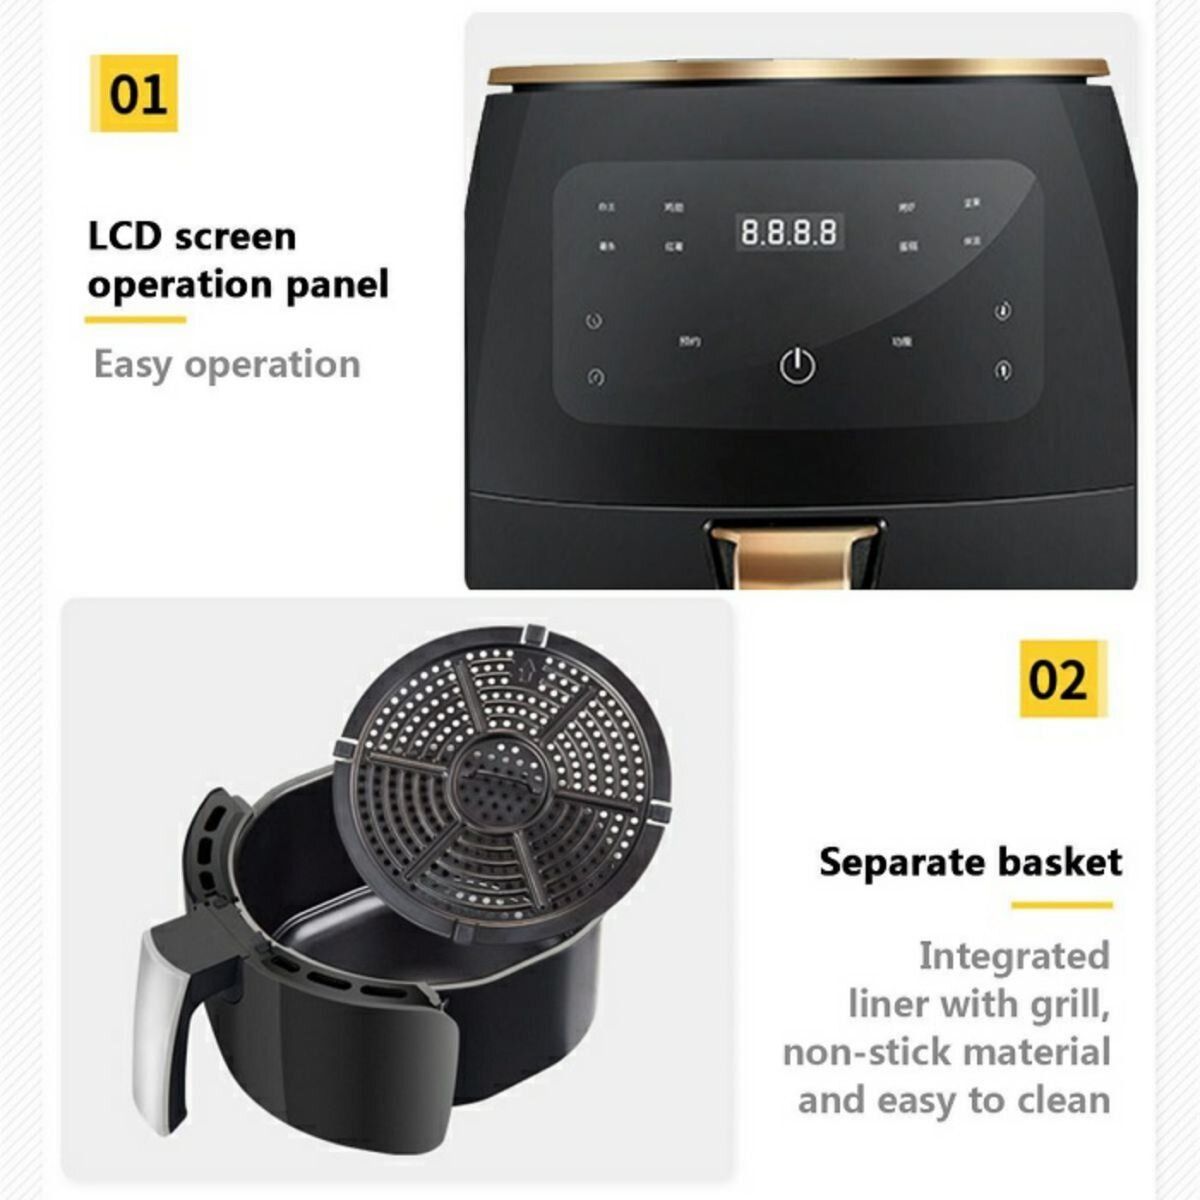 6L Air Fryer. Fry, Roast, and Bake all your favourite foods using up to 80% less fat